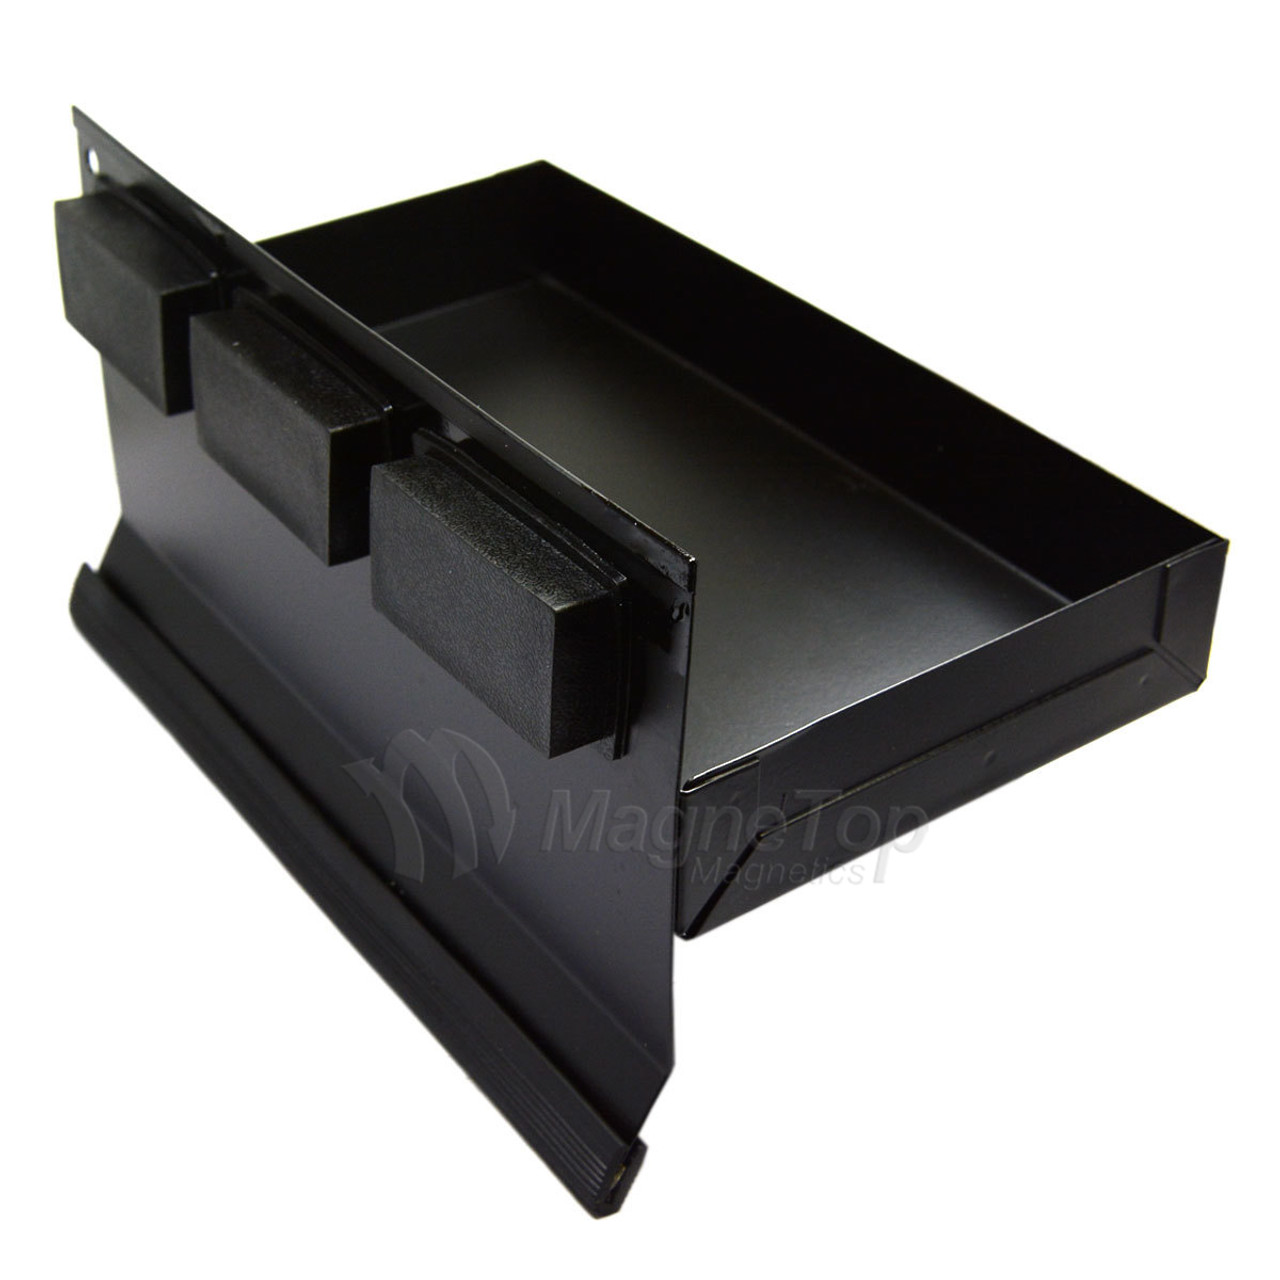 Magnetic Tool Tray 210mm x 115mm x 32mm